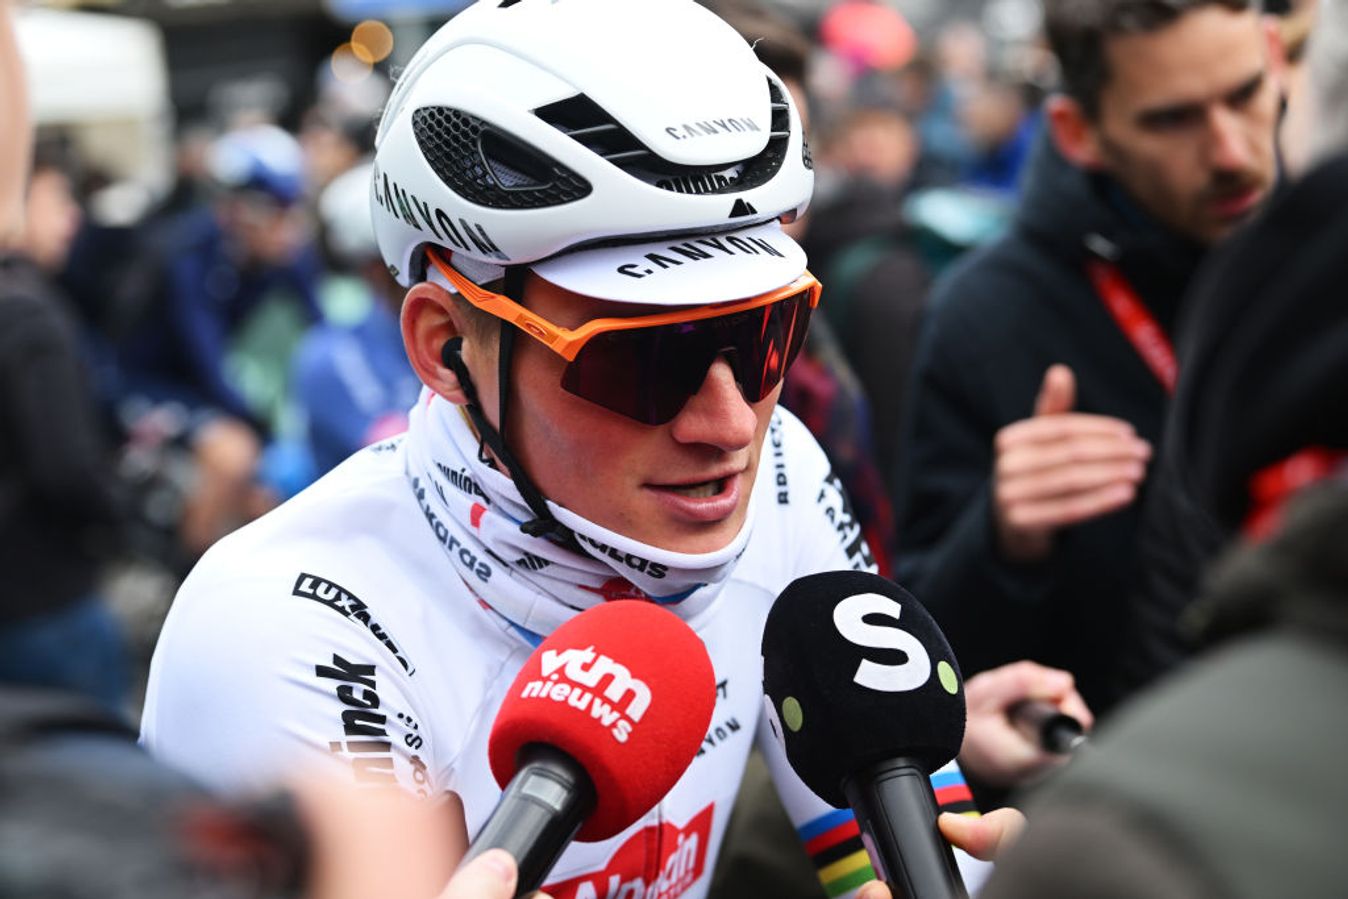 A wrapped up Van der Poel speaks to the media at the start